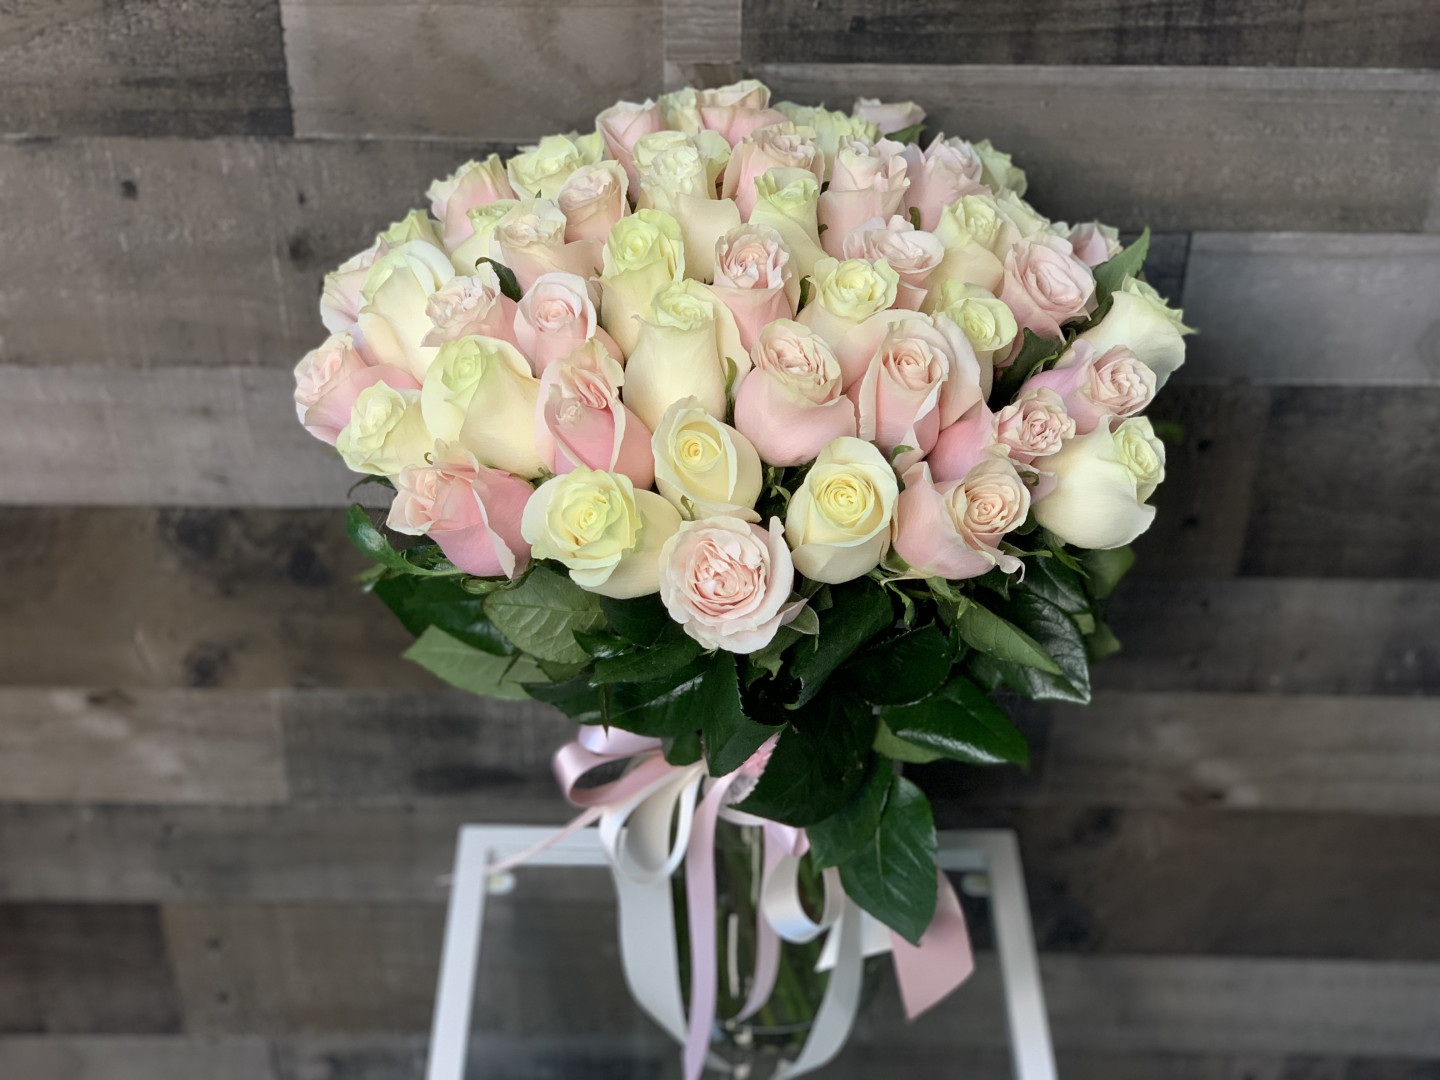 50 Light Pink & White Roses Bouquet